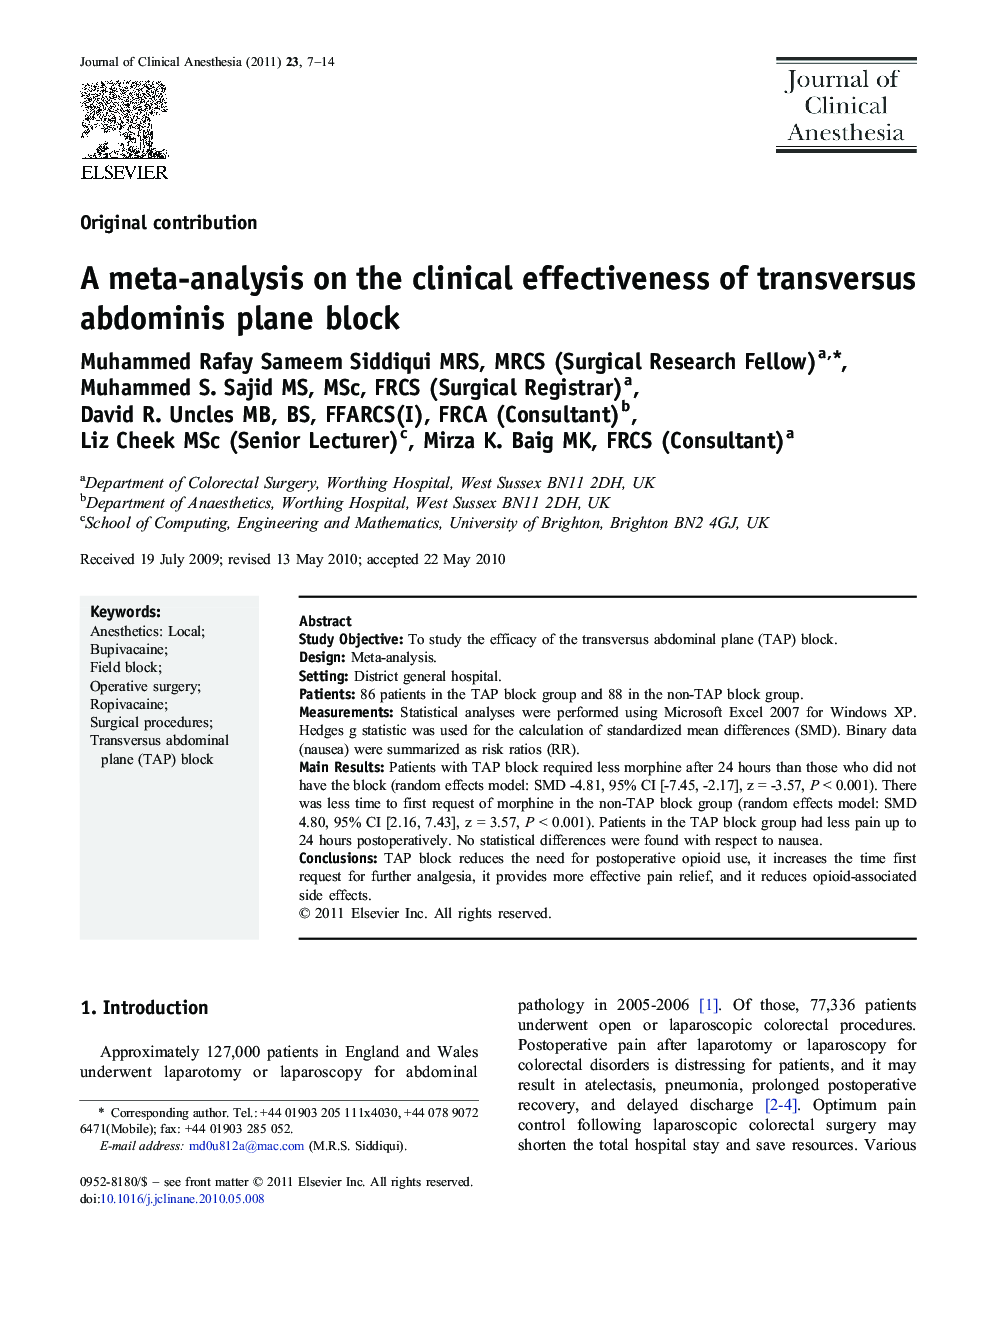 A meta-analysis on the clinical effectiveness of transversus abdominis plane block